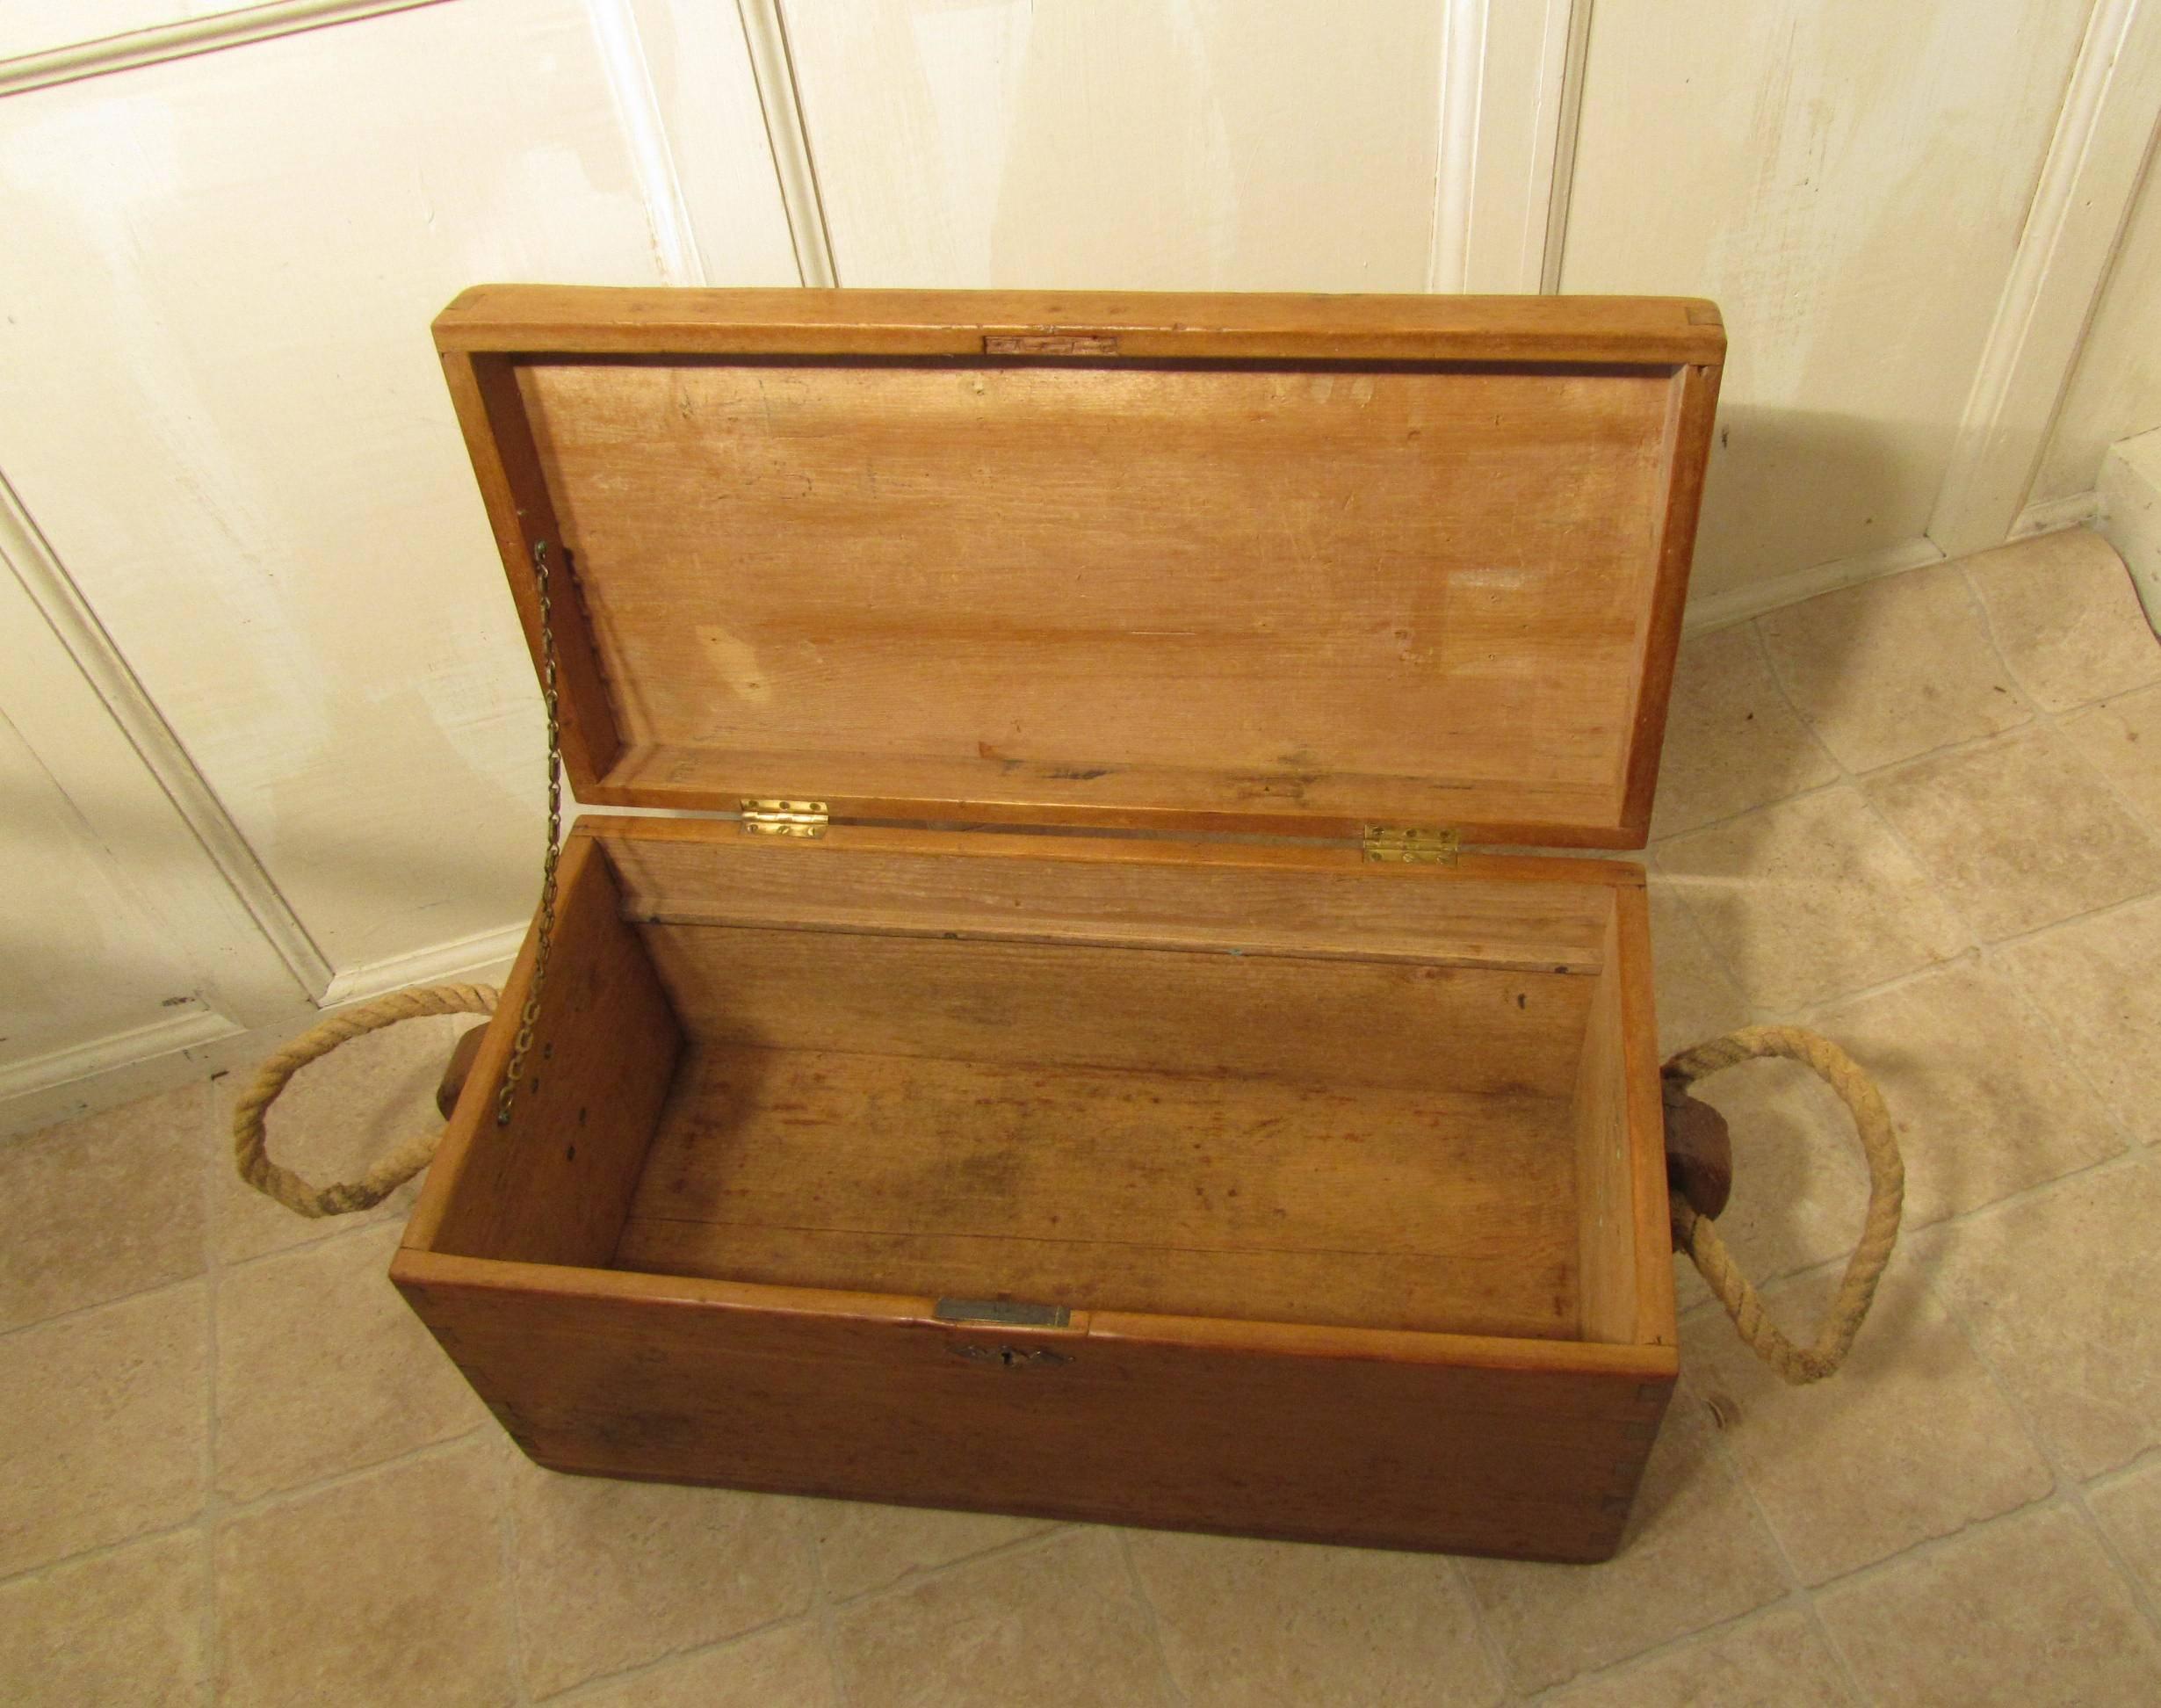 Victorian Pine Carpenters Box or Sea Chest 

This a good and interesting piece, the box has been stripped and waxed it in good condition no worm or any other defects, the rope handles have been replaced
This is an old piece with a pleasant look, it